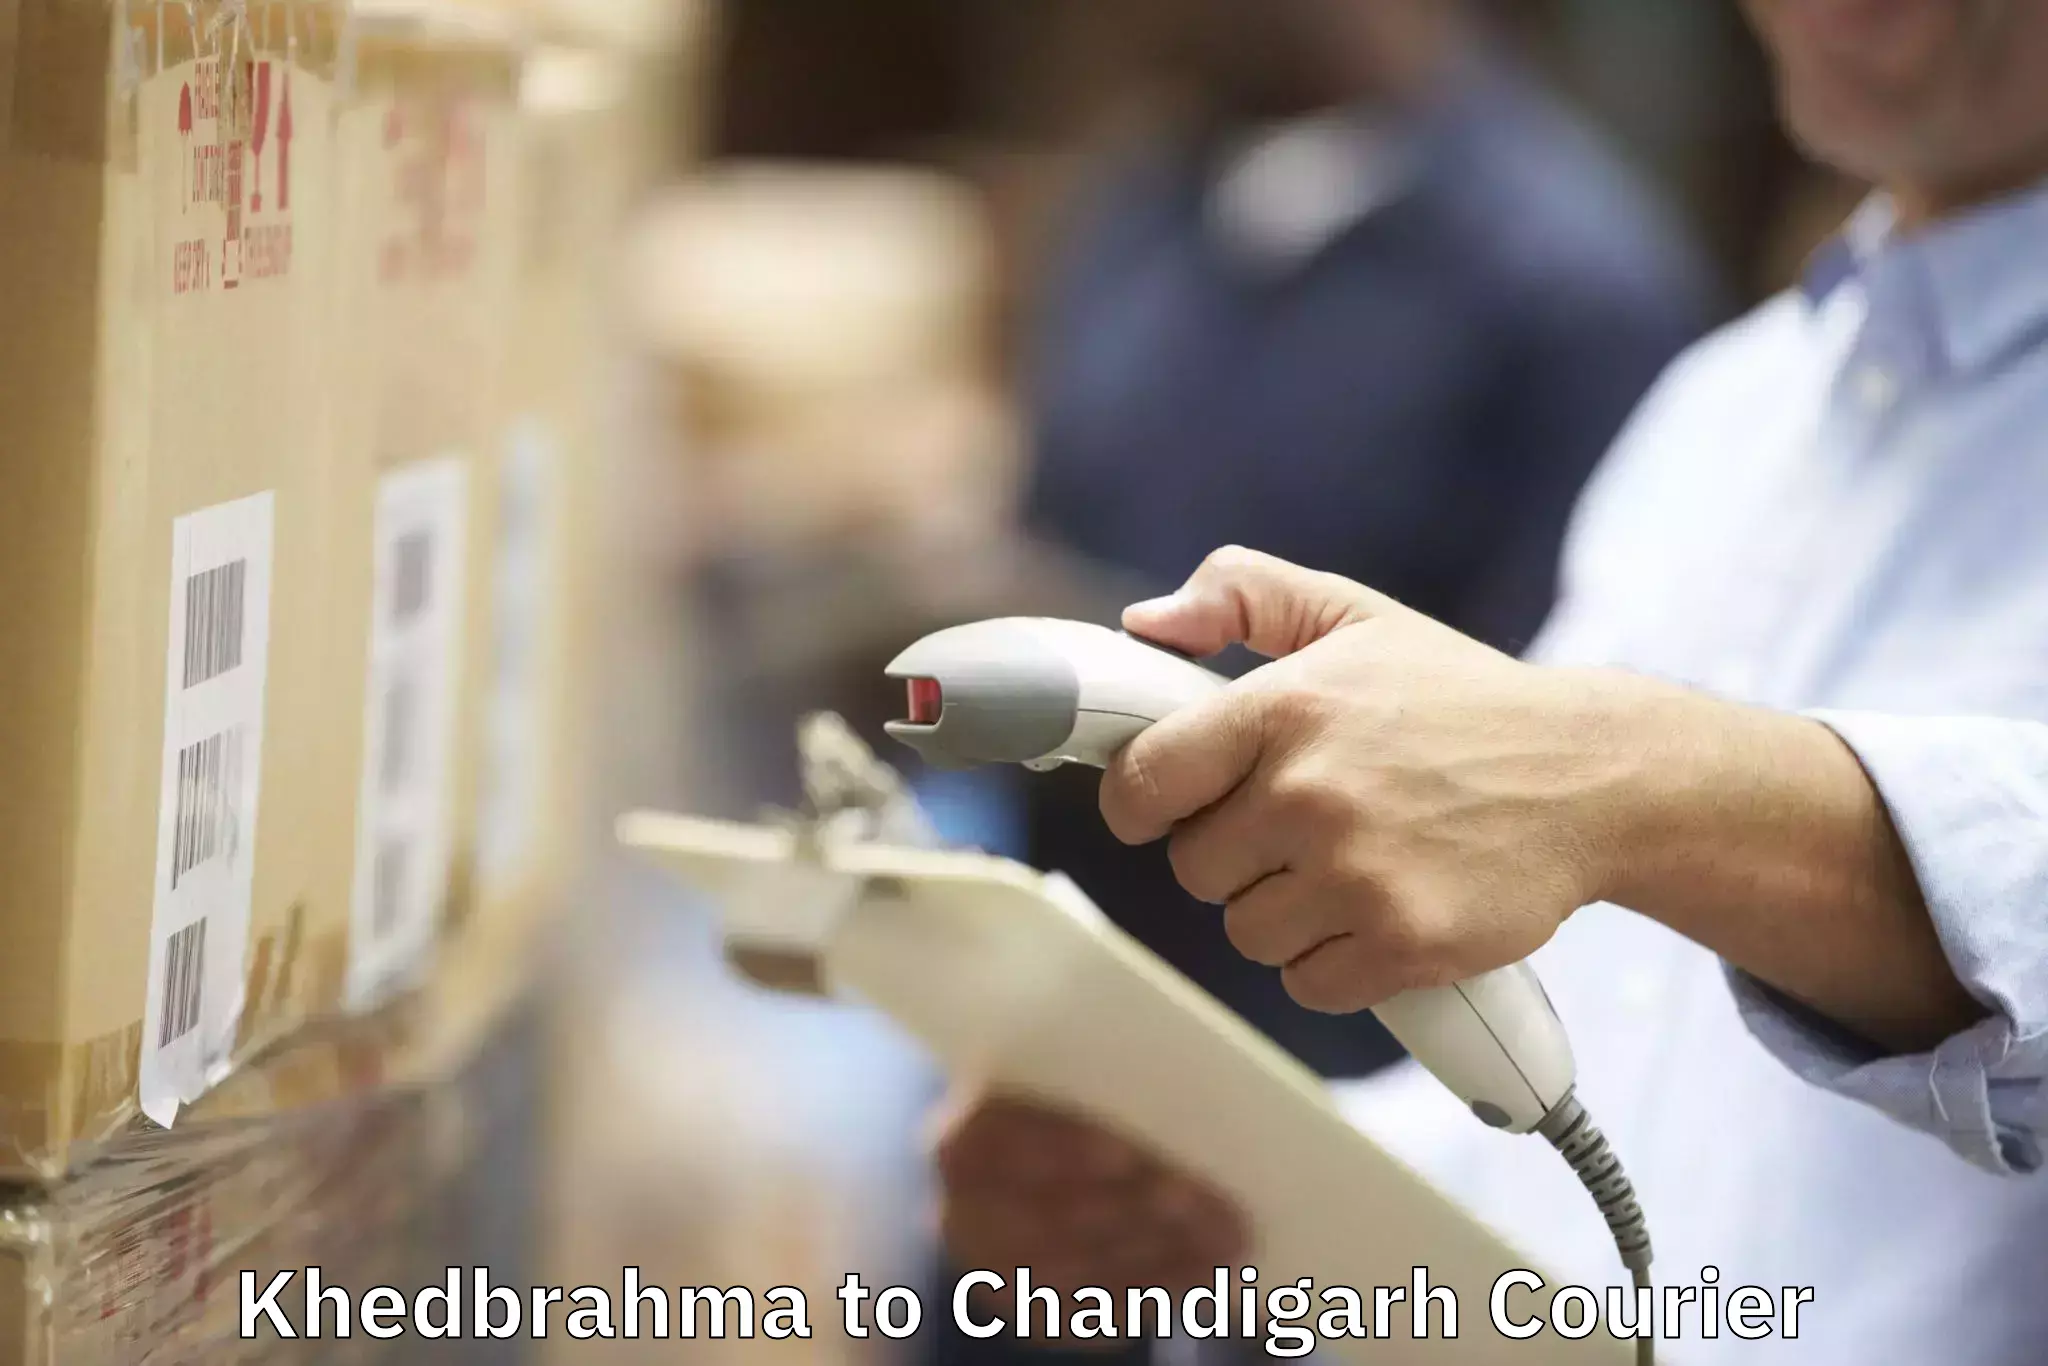 Moving and handling services Khedbrahma to Chandigarh